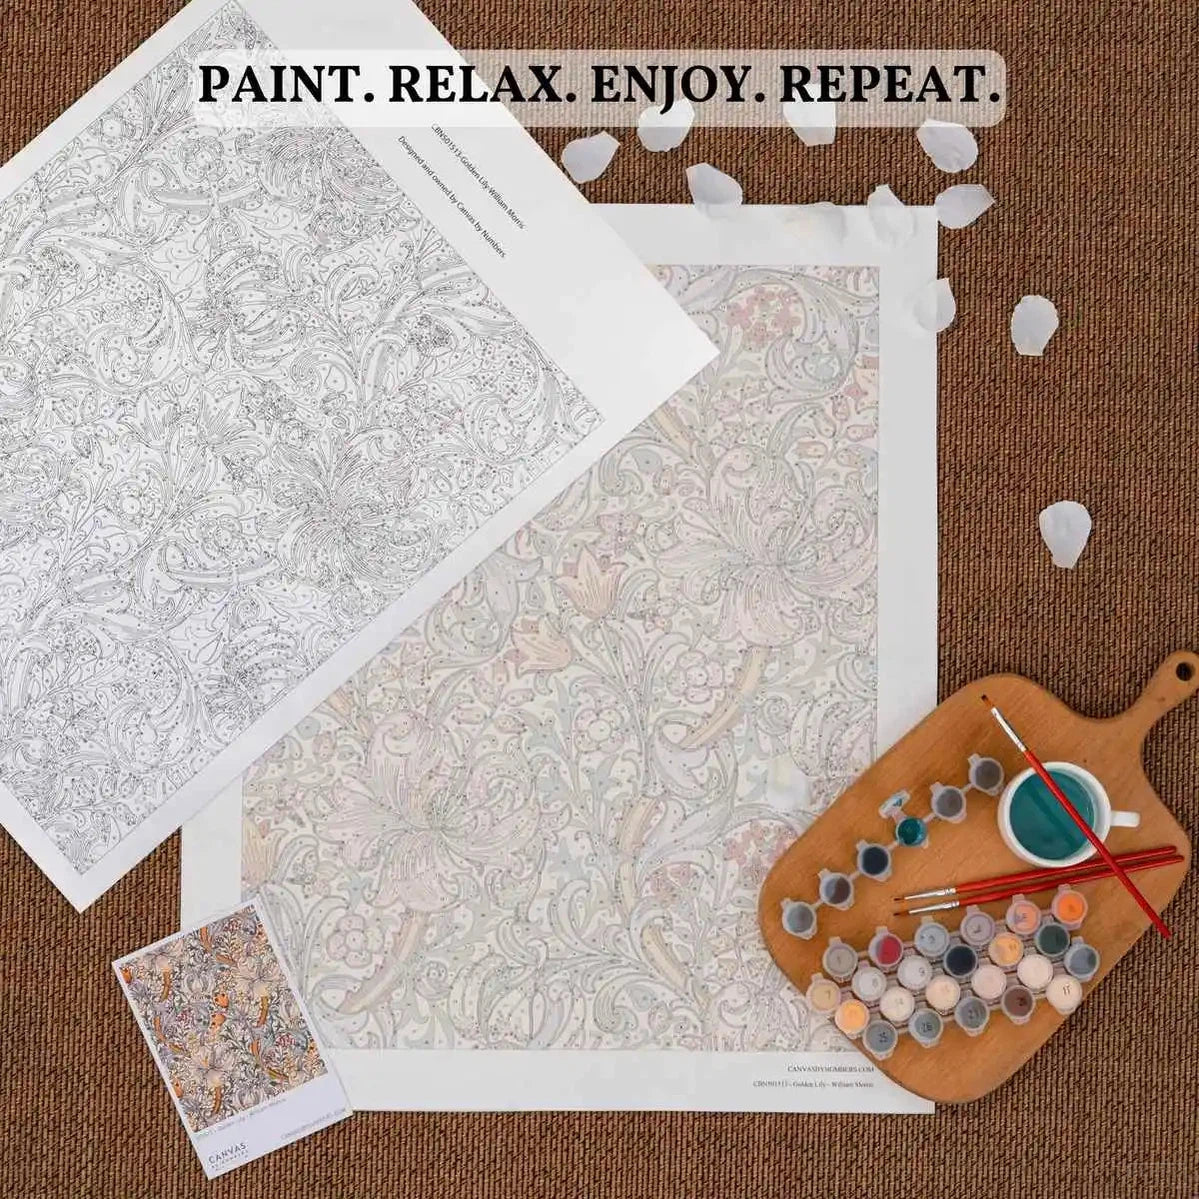 Peaceful Greys: Captivating Wolf Paint by Numbers Kit-In Peaceful Greys by Scot Storm, wolf paint by numbers lets you paint the spirit of the wild and capture the beauty of wolves painting on canvas effortlessly.-Canvas by Numbers